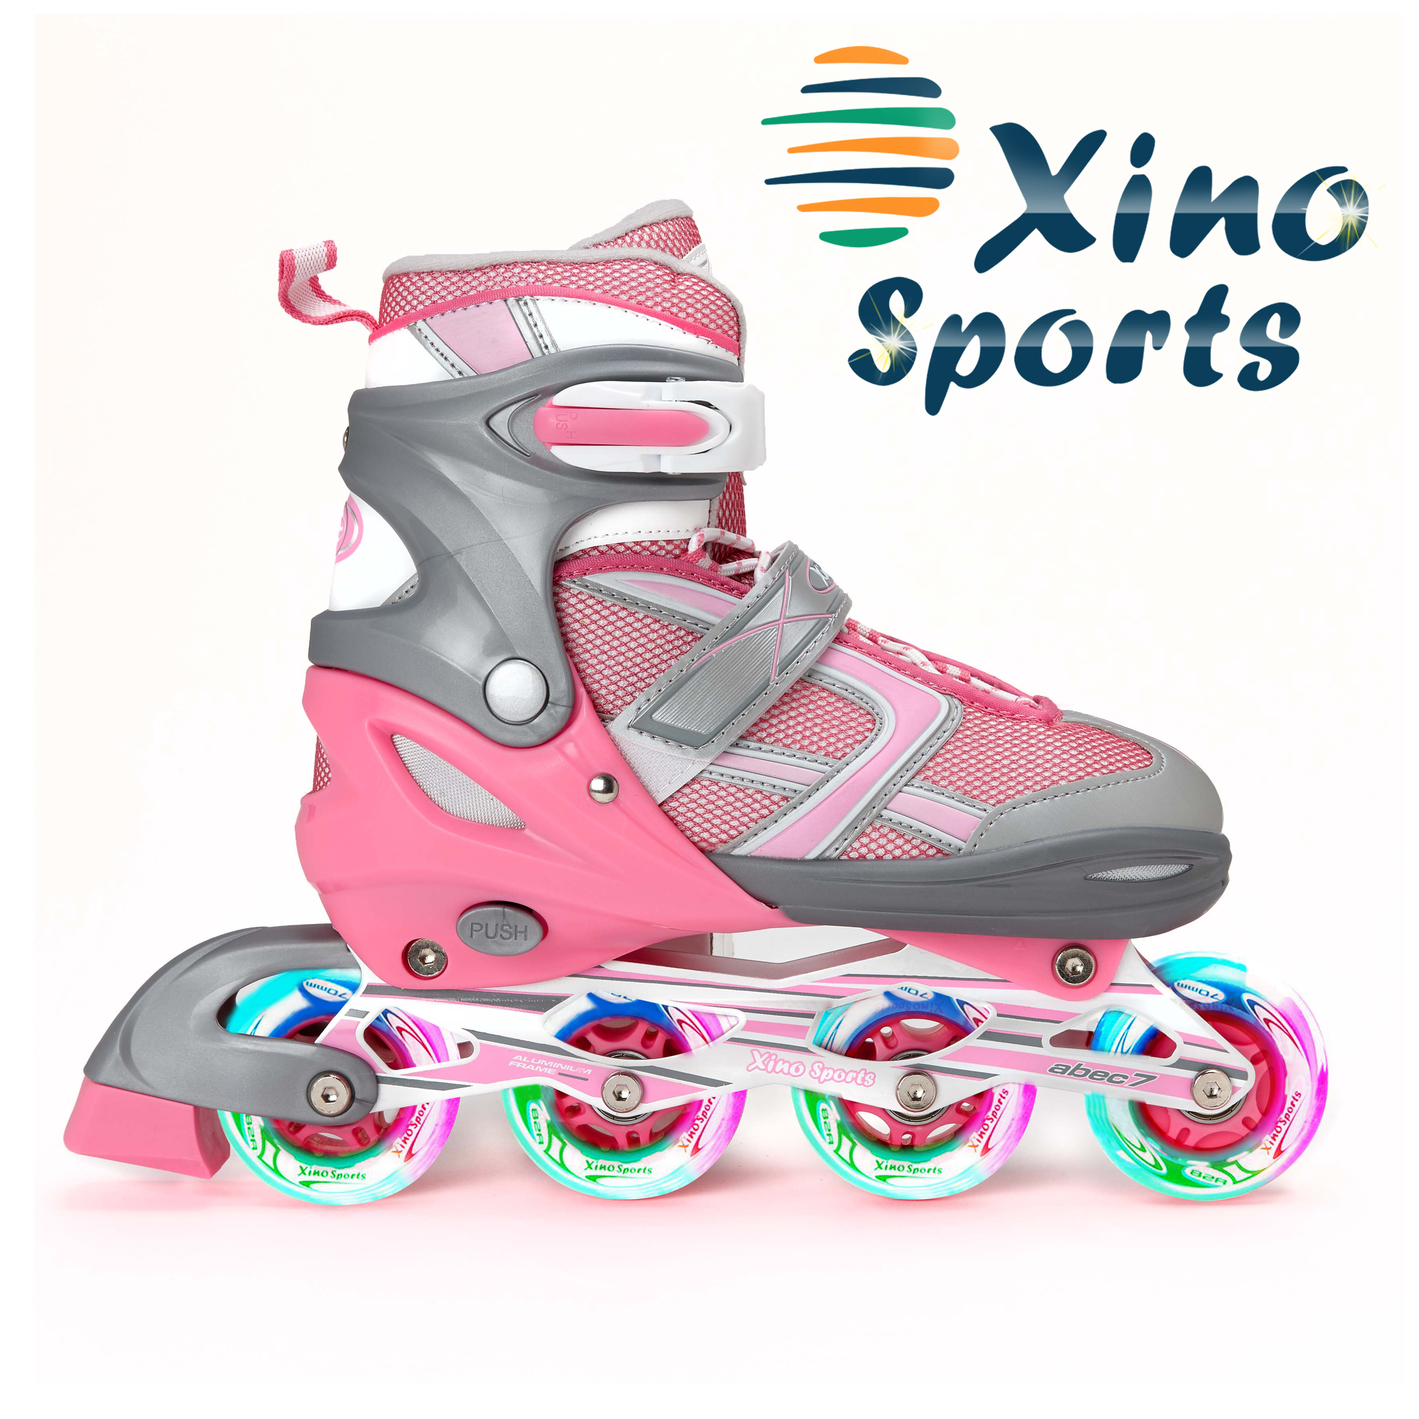 Xino Sports, LLC, Friday, February 14, 2020, Press release picture